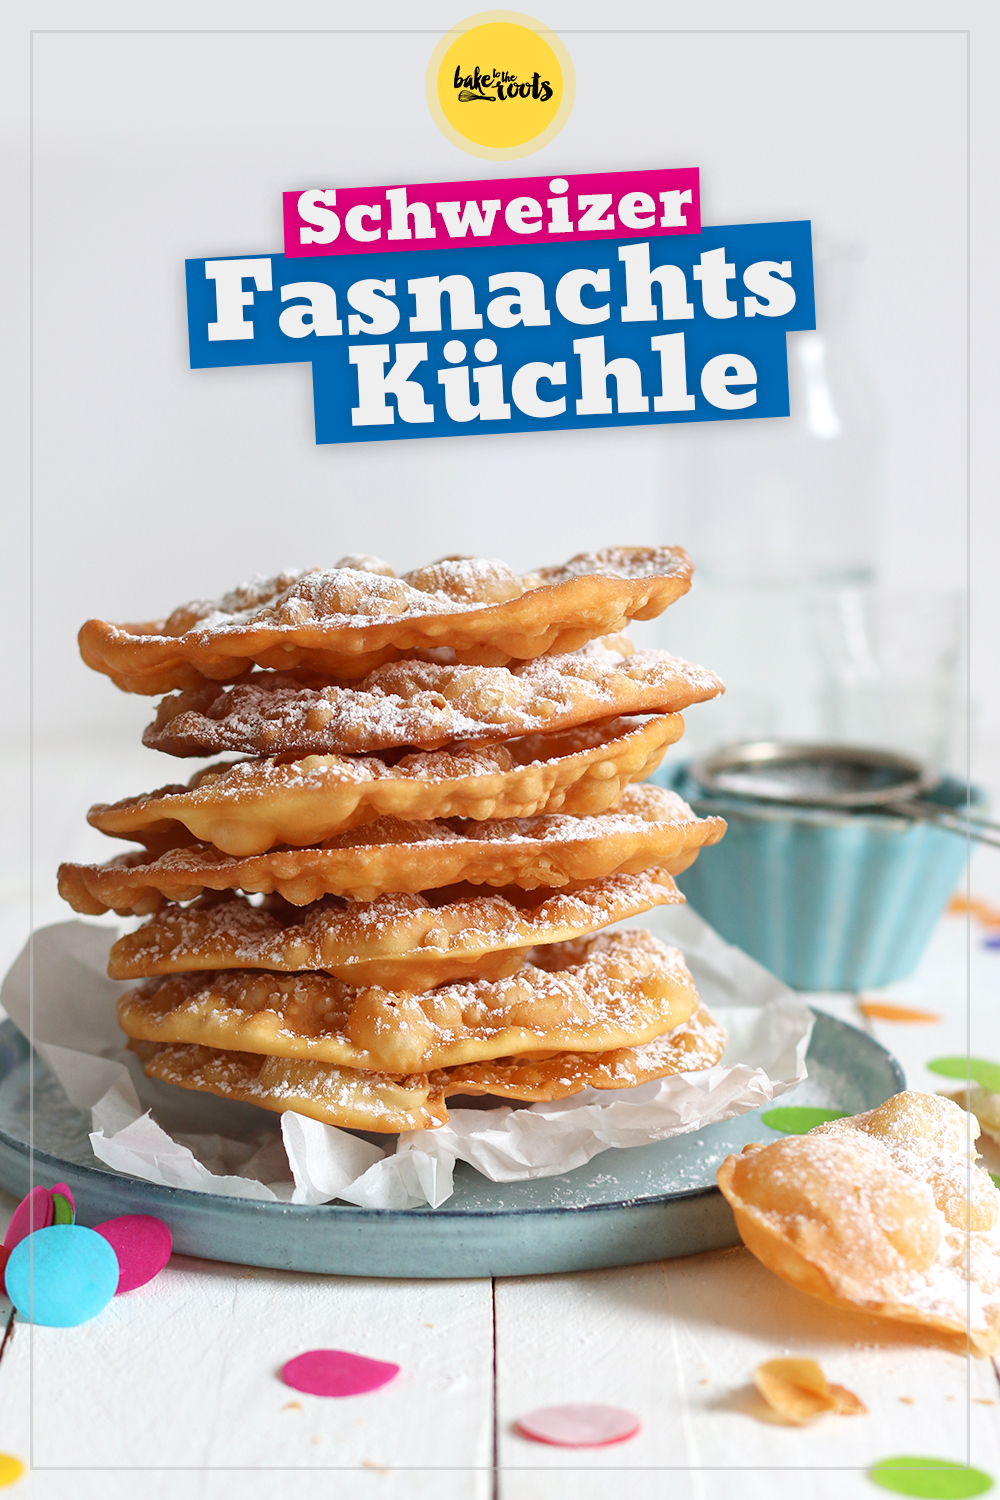 Schweizer Fasnachtsküchle | Bake to the roots